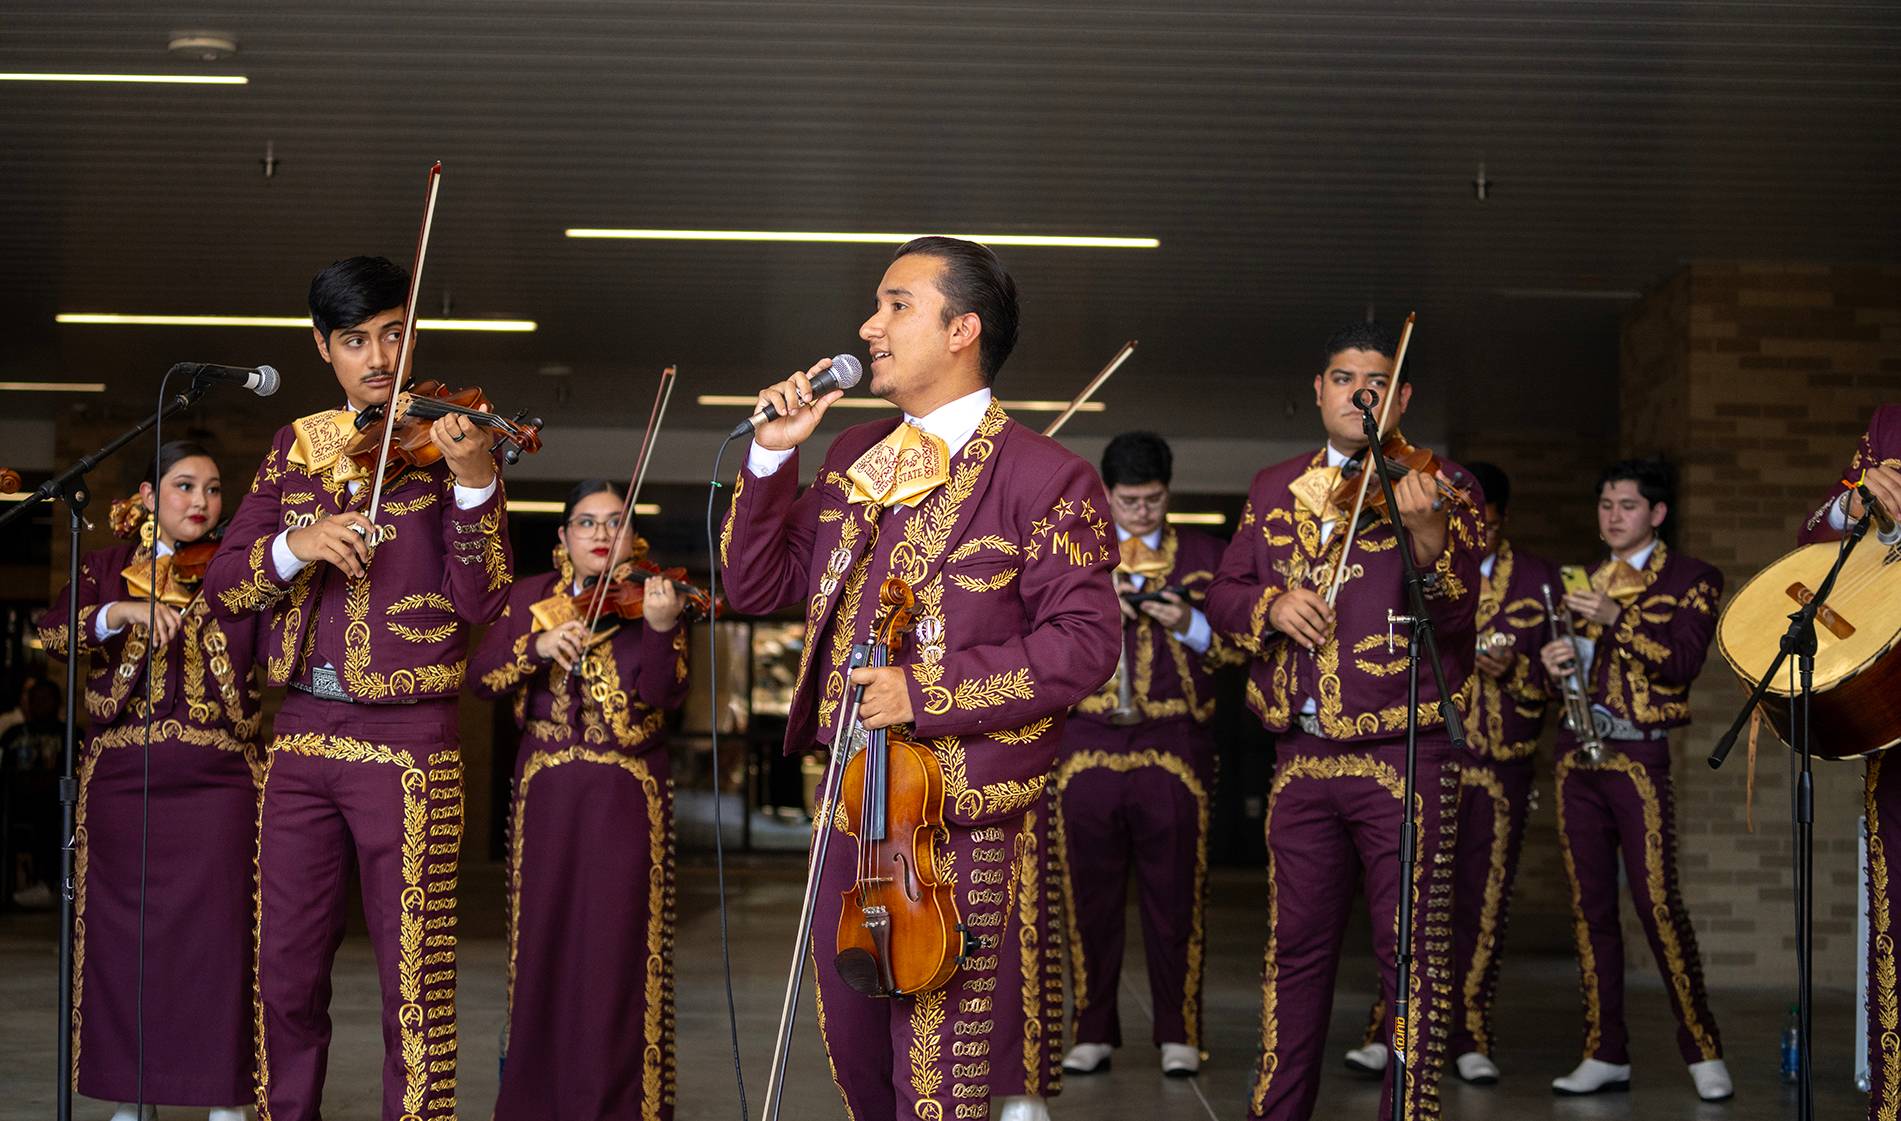 man in mariachi band singing into a microphone